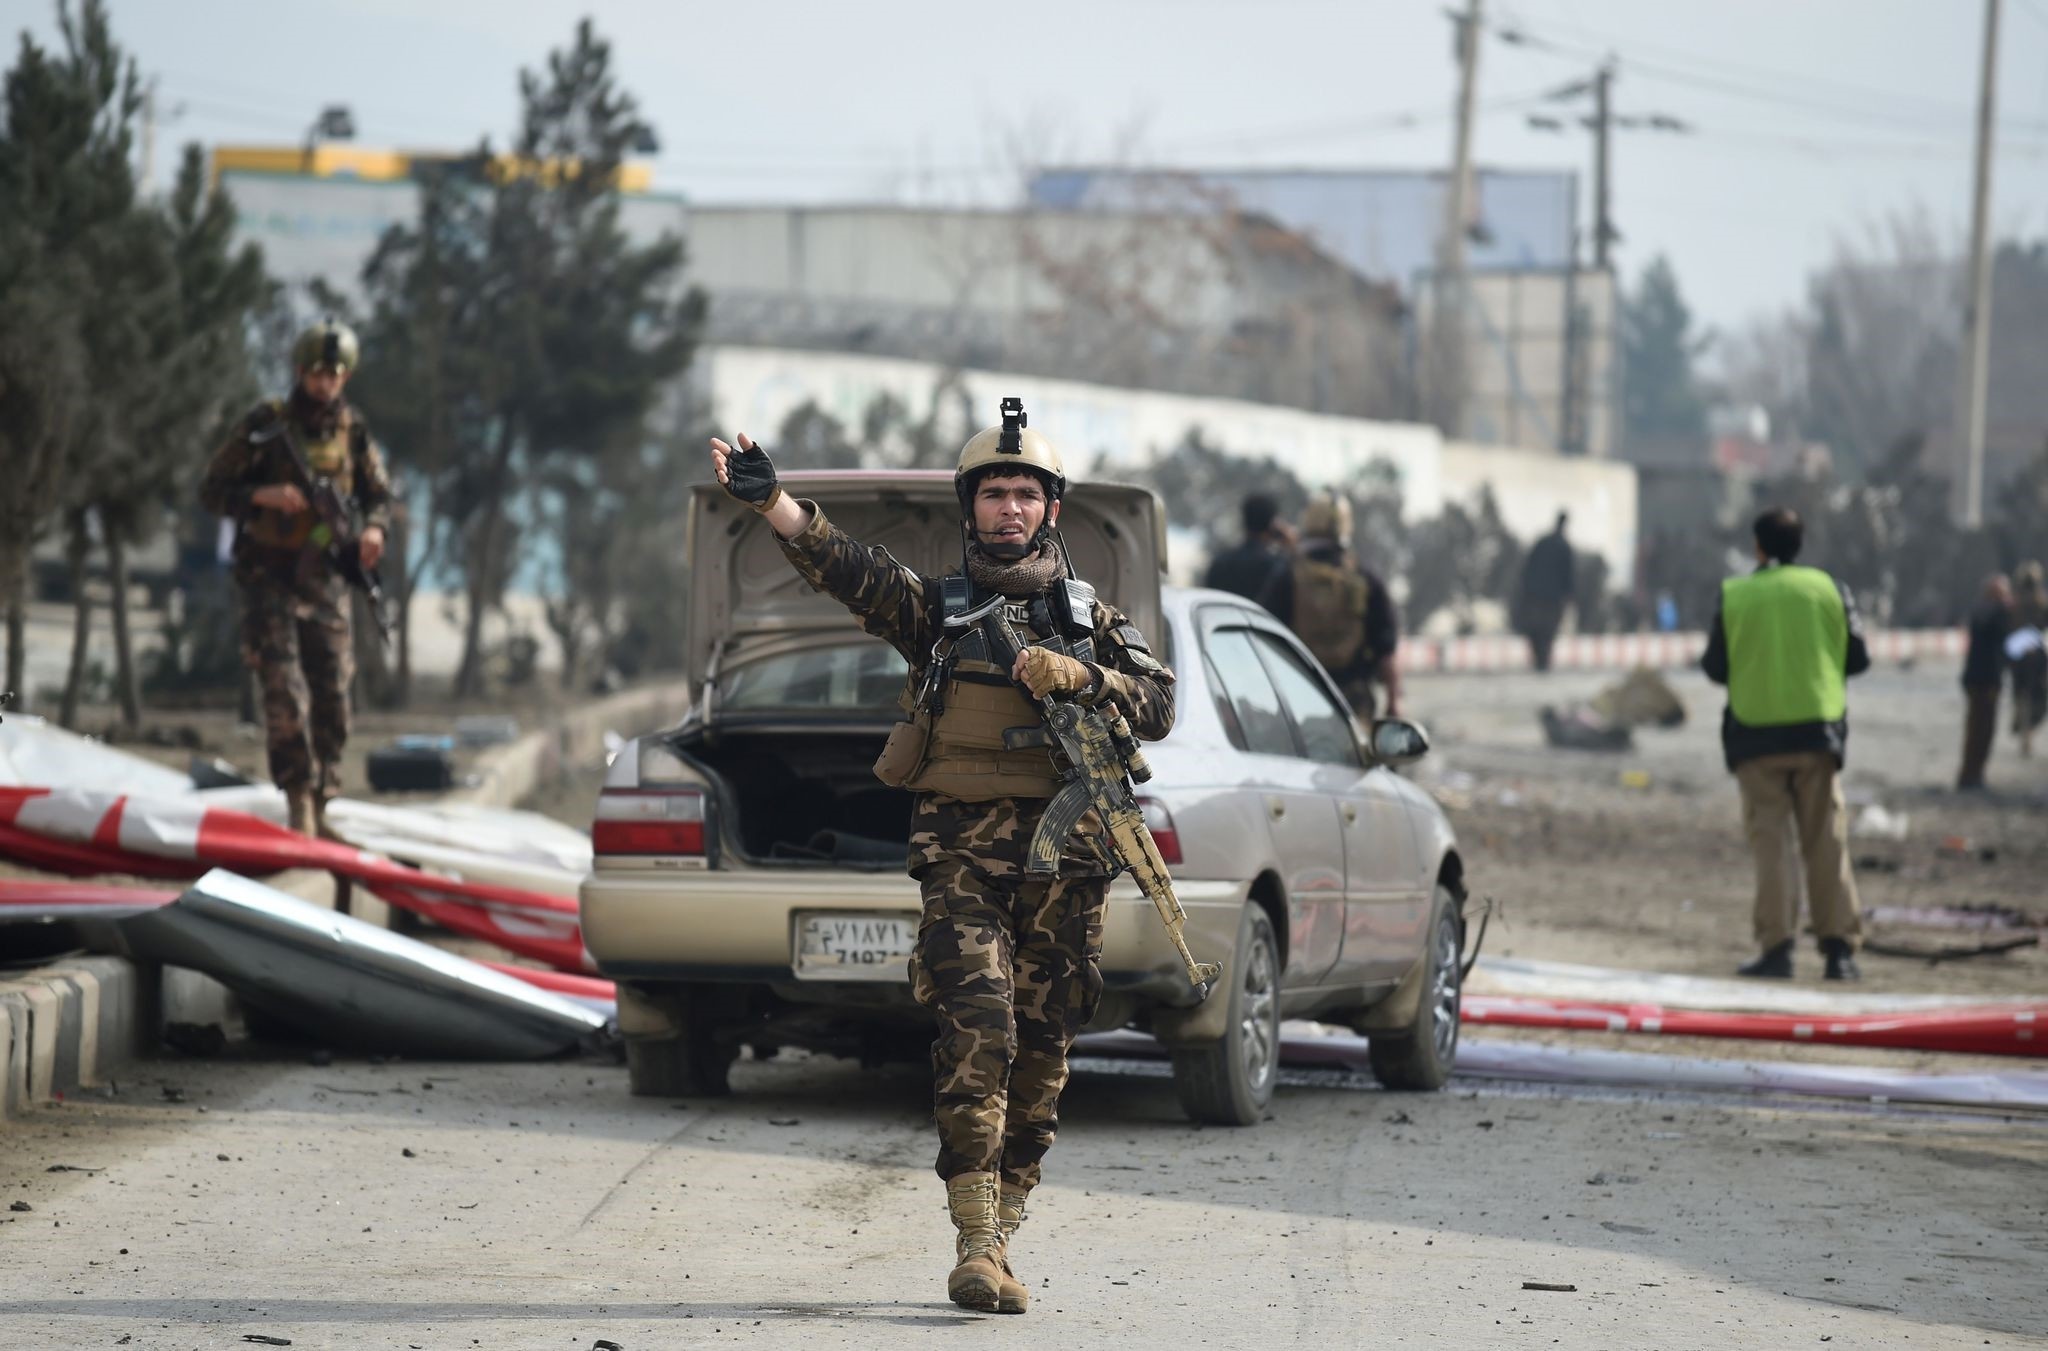 An Afghan security personnel gestures as he arrives at the site of a car bomb attack targeting a foreign forces, in Kabul on March 2, 2018. (AFP Photo)